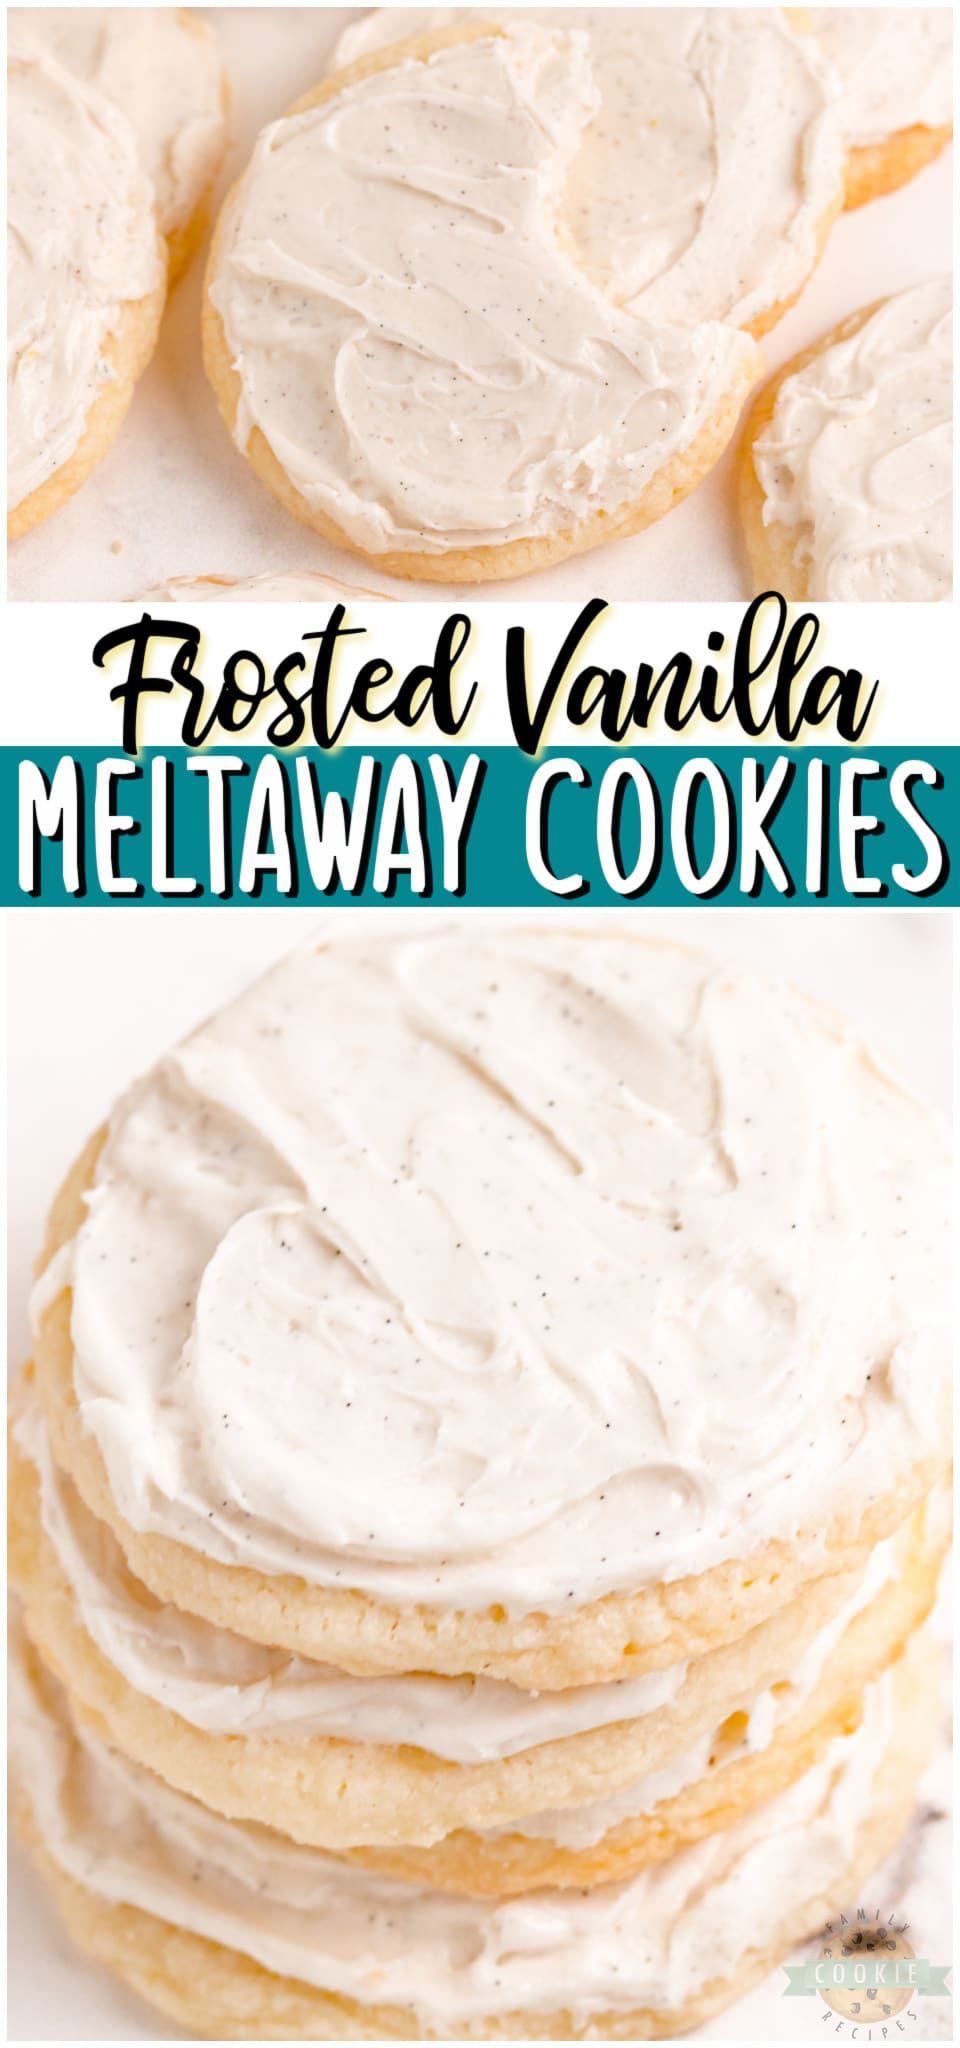 Vanilla Meltaways are a melt-in-your-mouth soft cookie topped with a light vanilla bean frosting. Very vanilla soft, sweet cookie that everyone loves! #meltaways #vanilla #cookies #baking #dessert #easyrecipe from FAMILY COOKIE RECIPES via @buttergirls